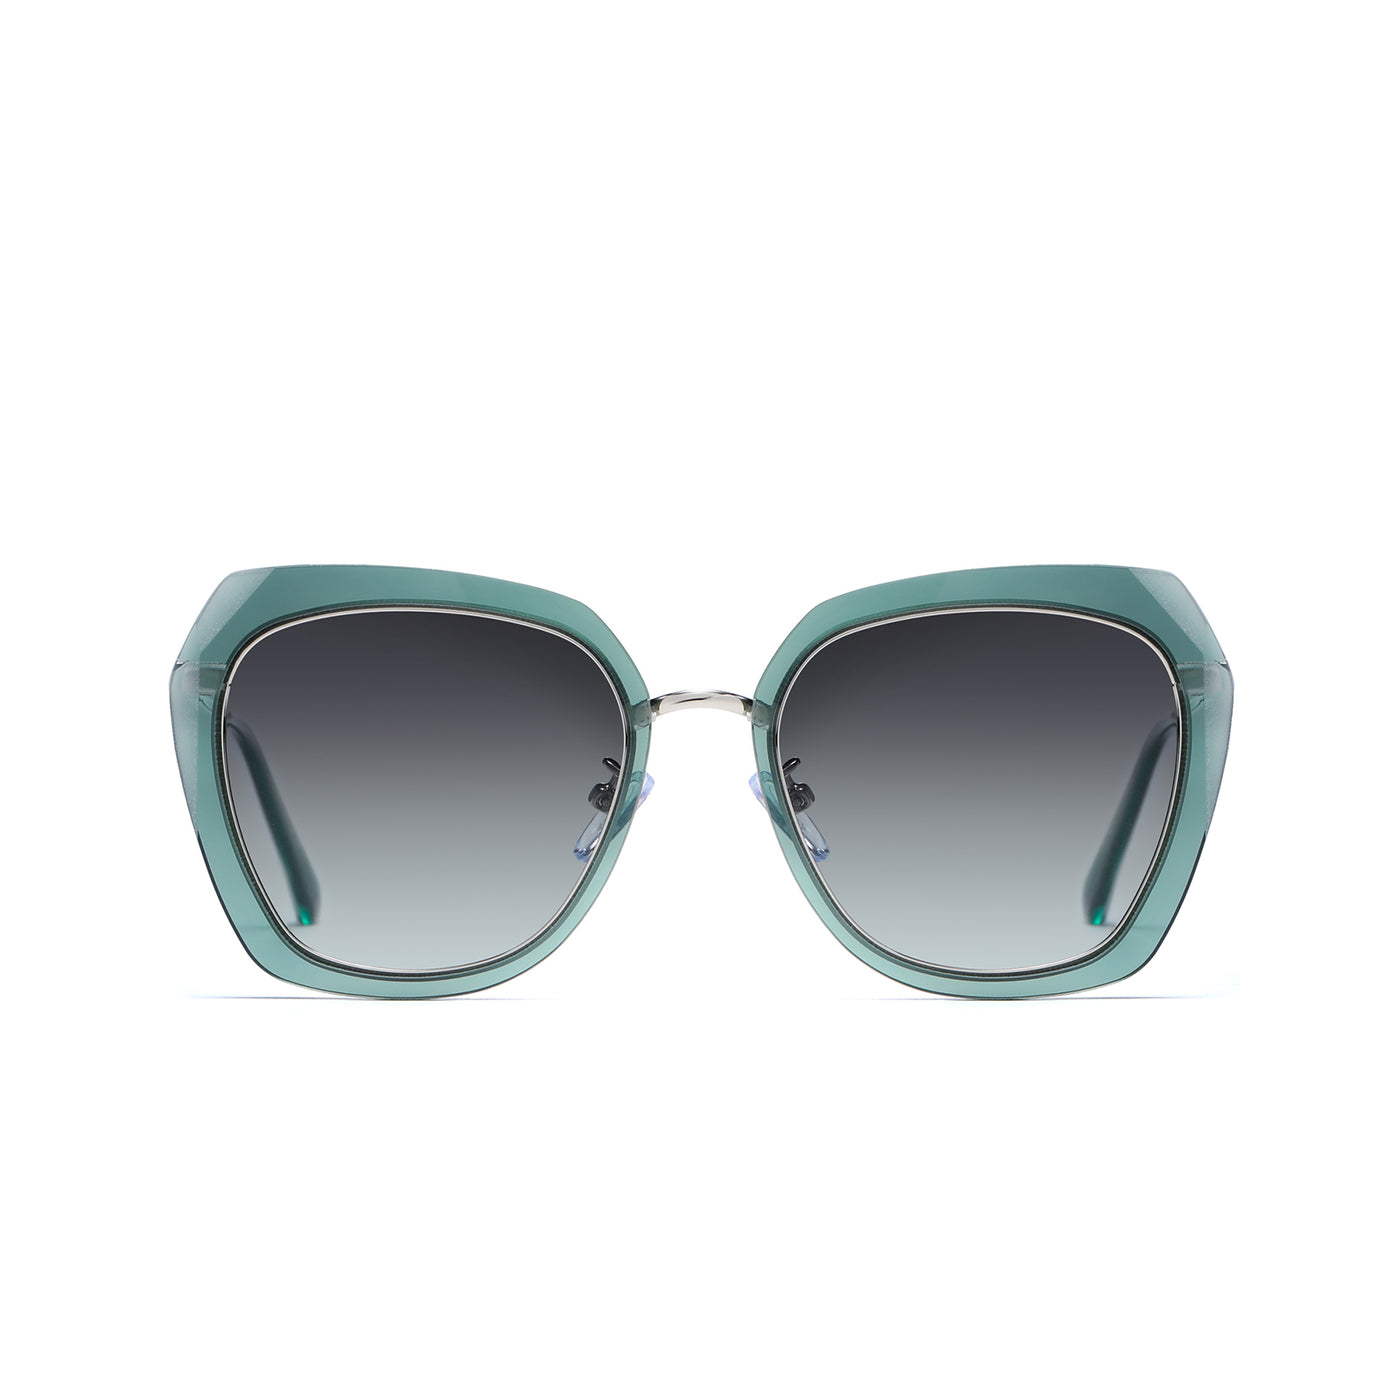 DUCO GLASSES-The right kind of shady Otto Duco Women